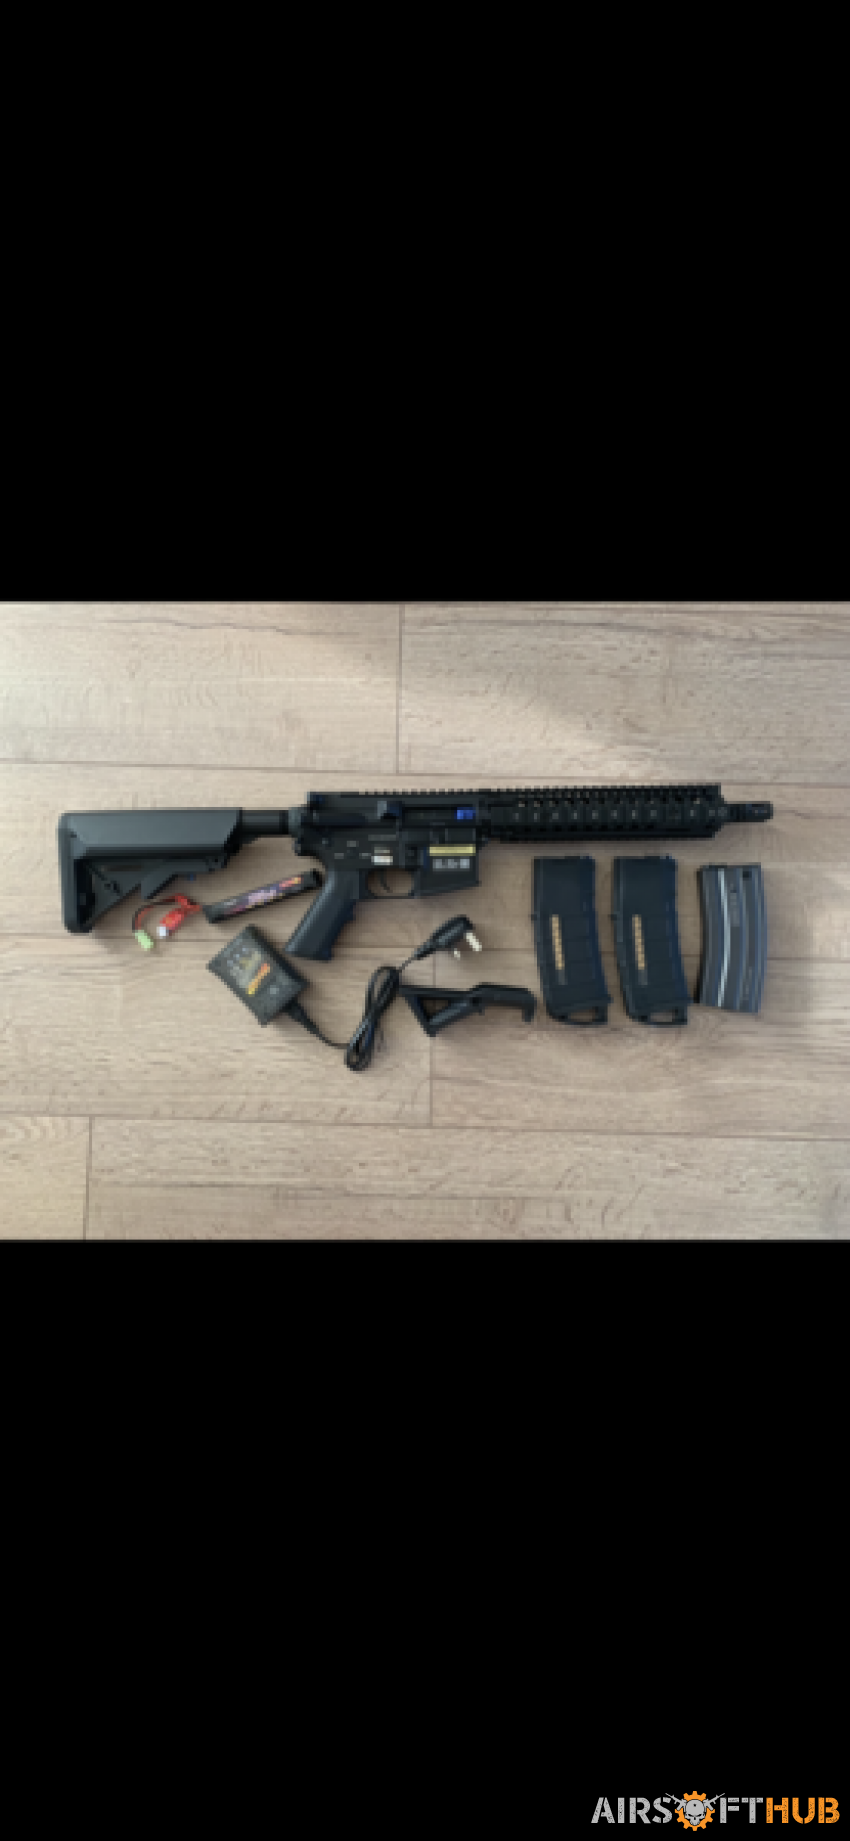 Specna arms SA-A03 MK18 - Used airsoft equipment